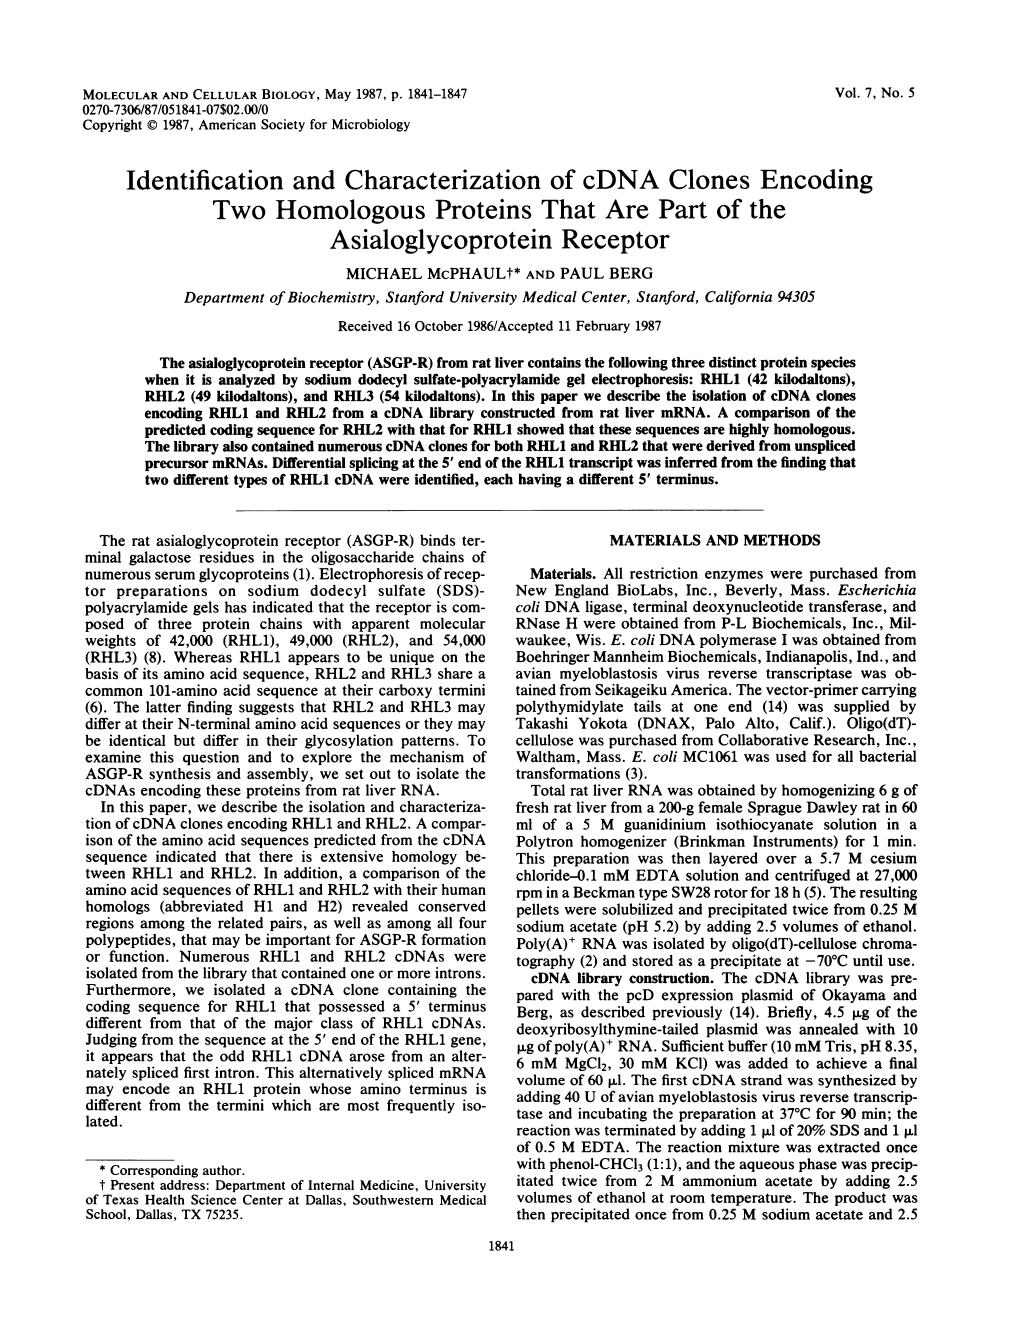 Identification and Characterization of Cdna Clones Encoding Two